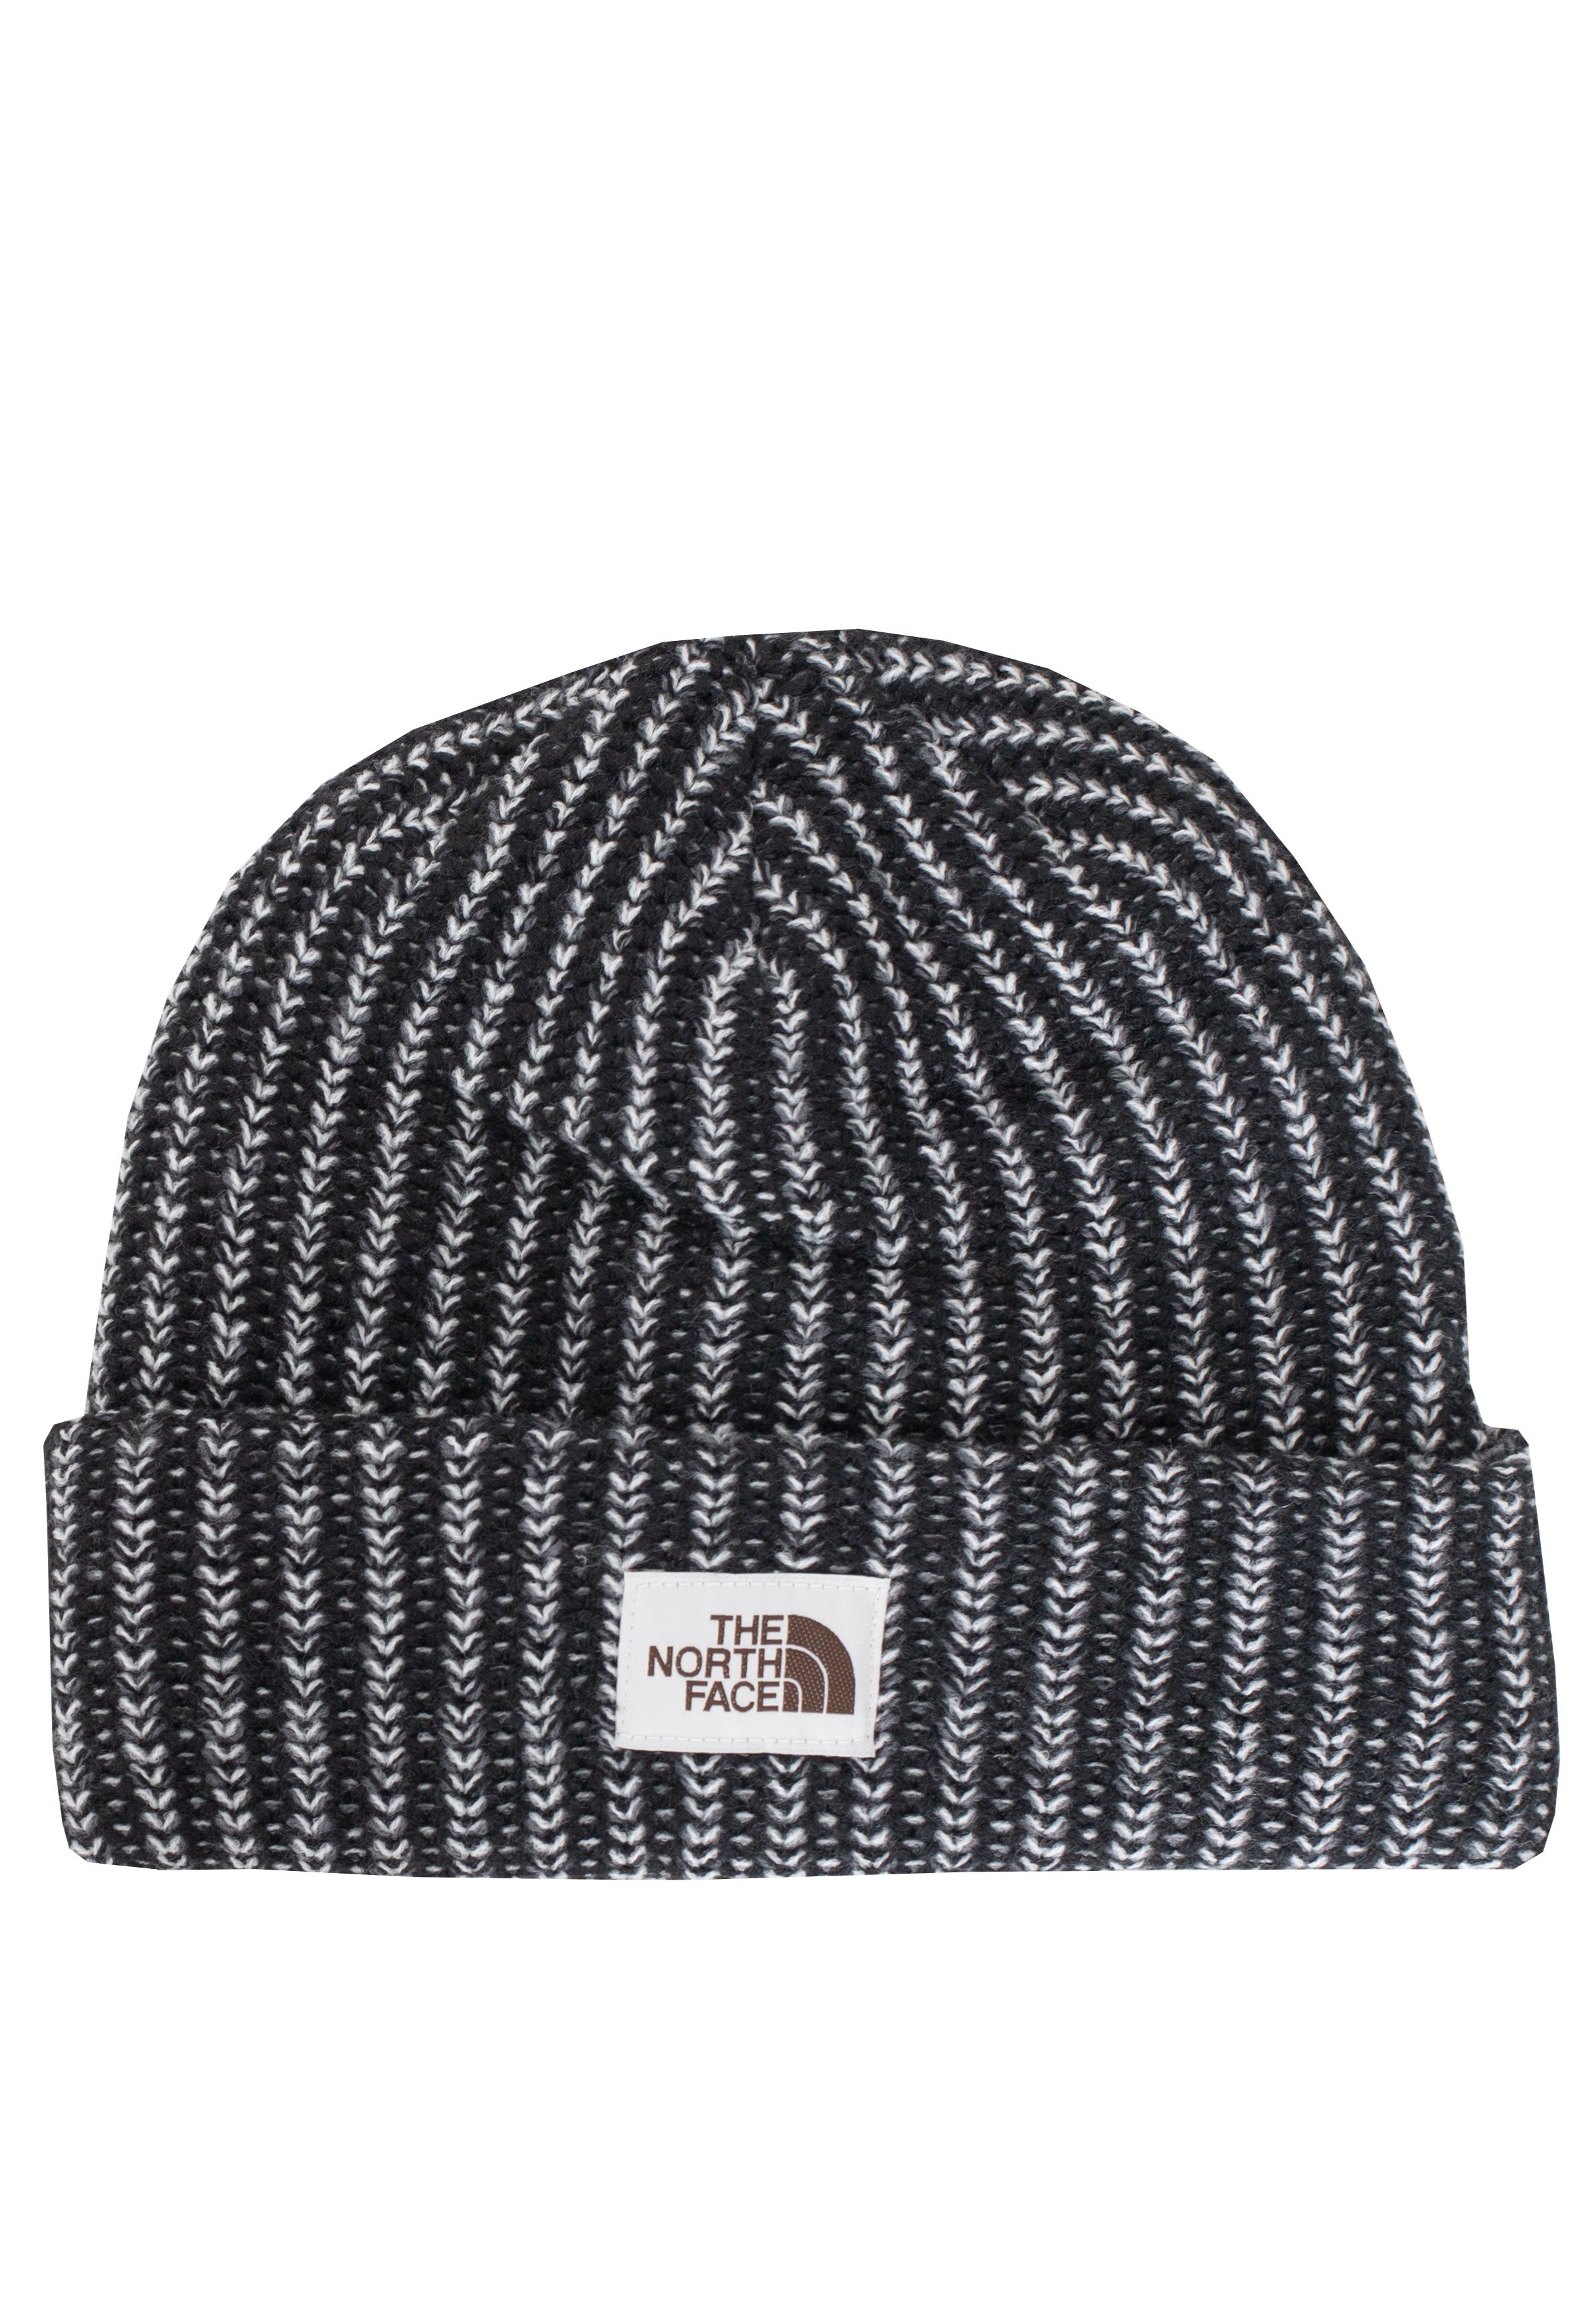 The North Face - Salty Bae Black - Beanies